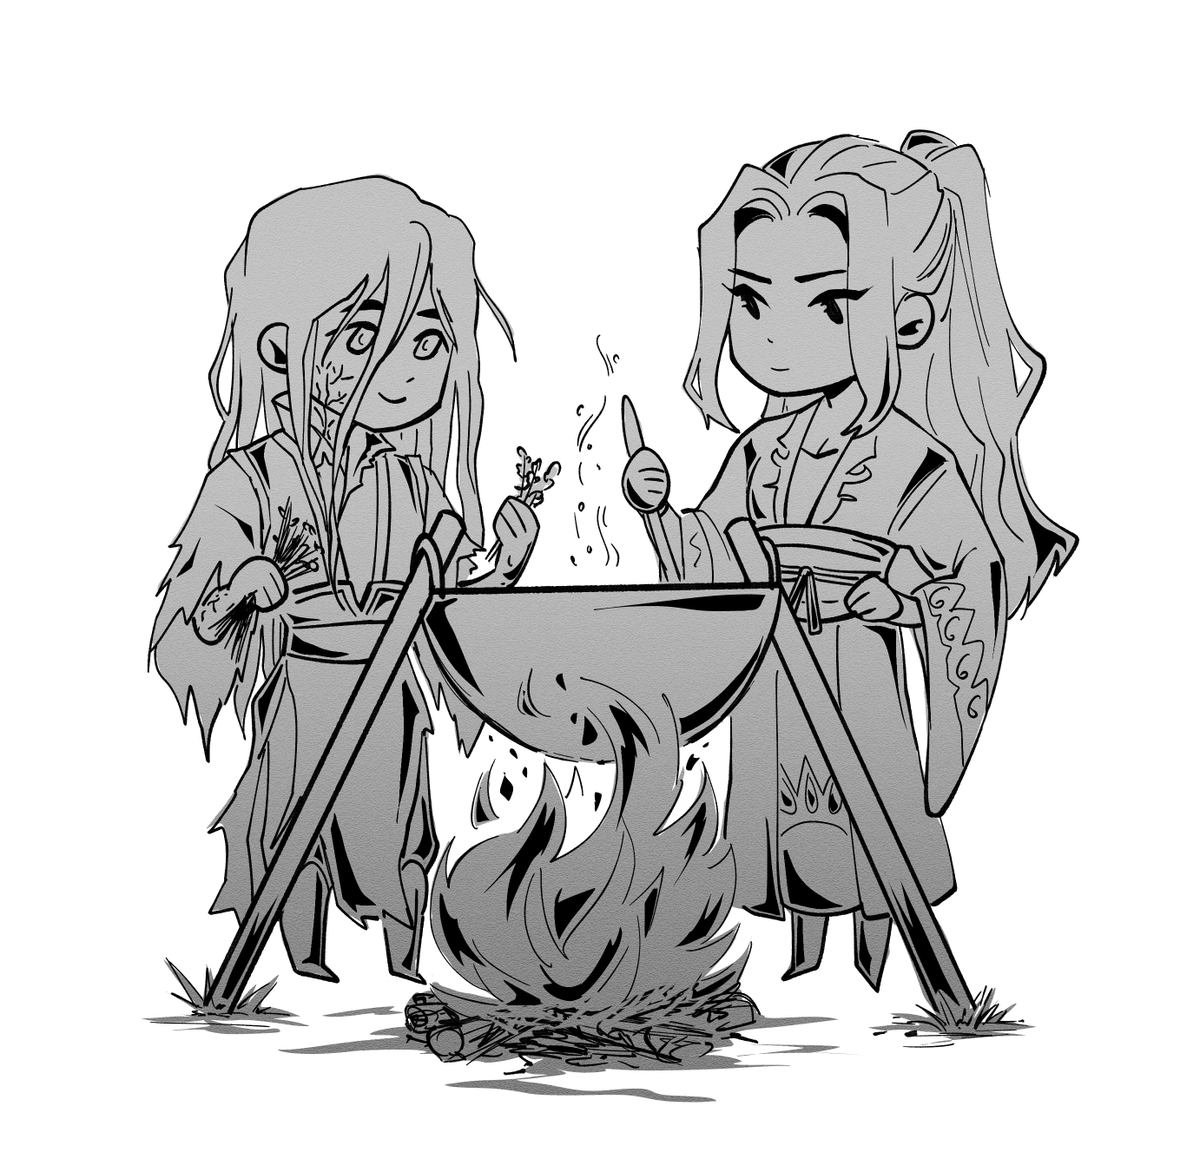 wen ning and wen qing mixing medicinal concotions together for @CloudAnthill for the @MDZSaction for Gaza!! thank you so much for donating :)) #mdzs